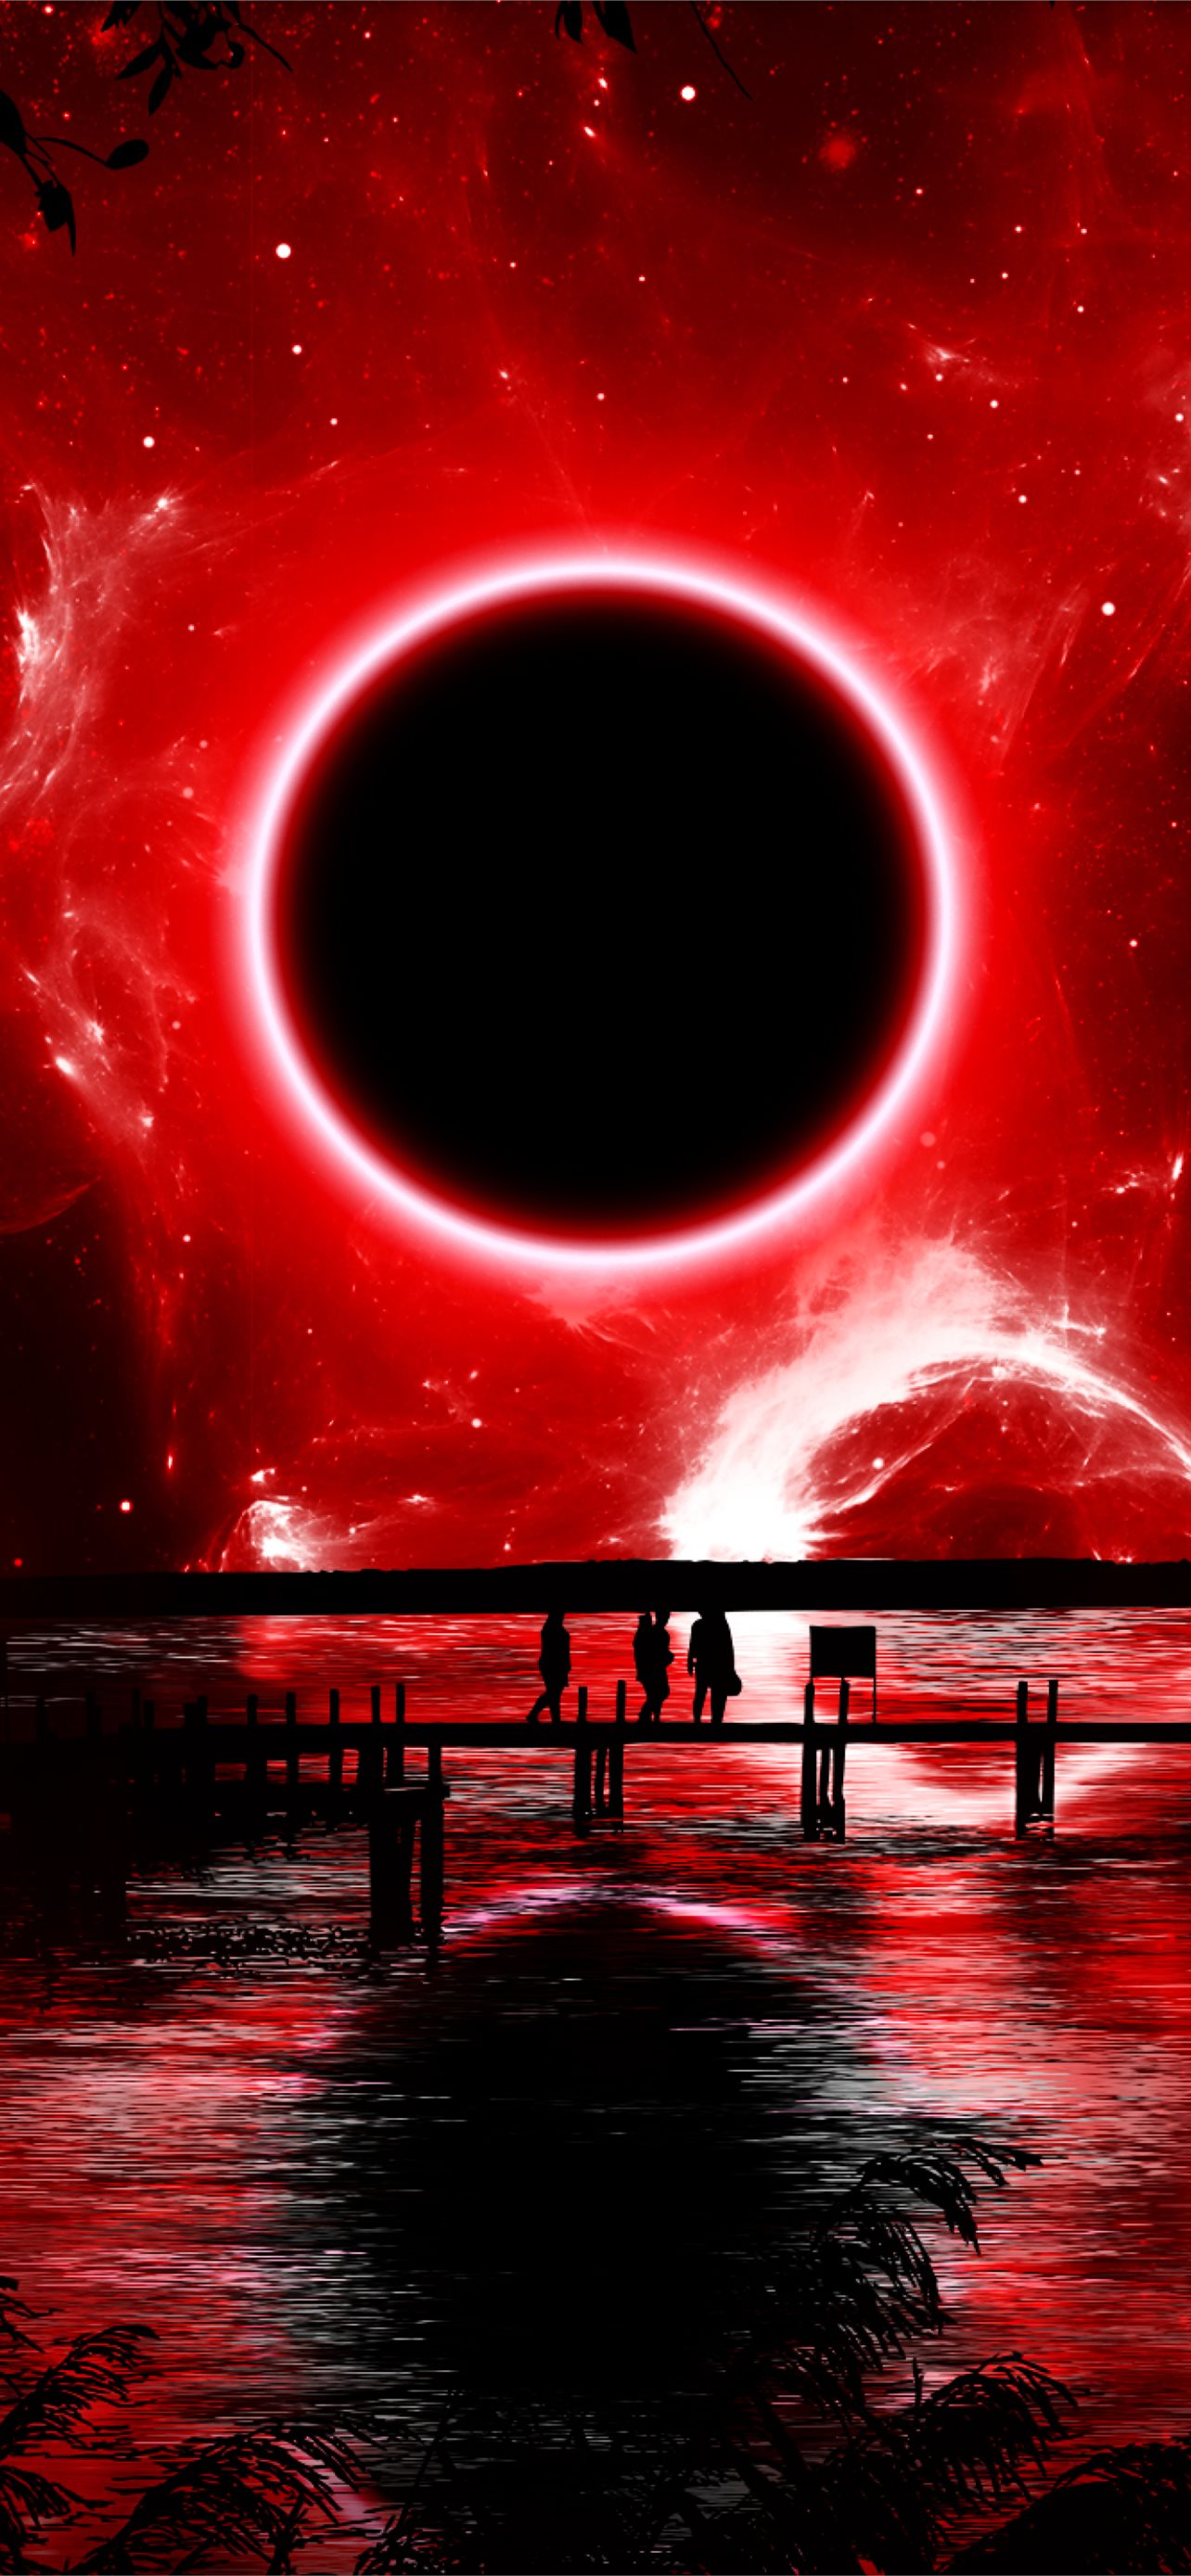 Red eclipse digital art resolution hd space k ima iphone wallpapers free download